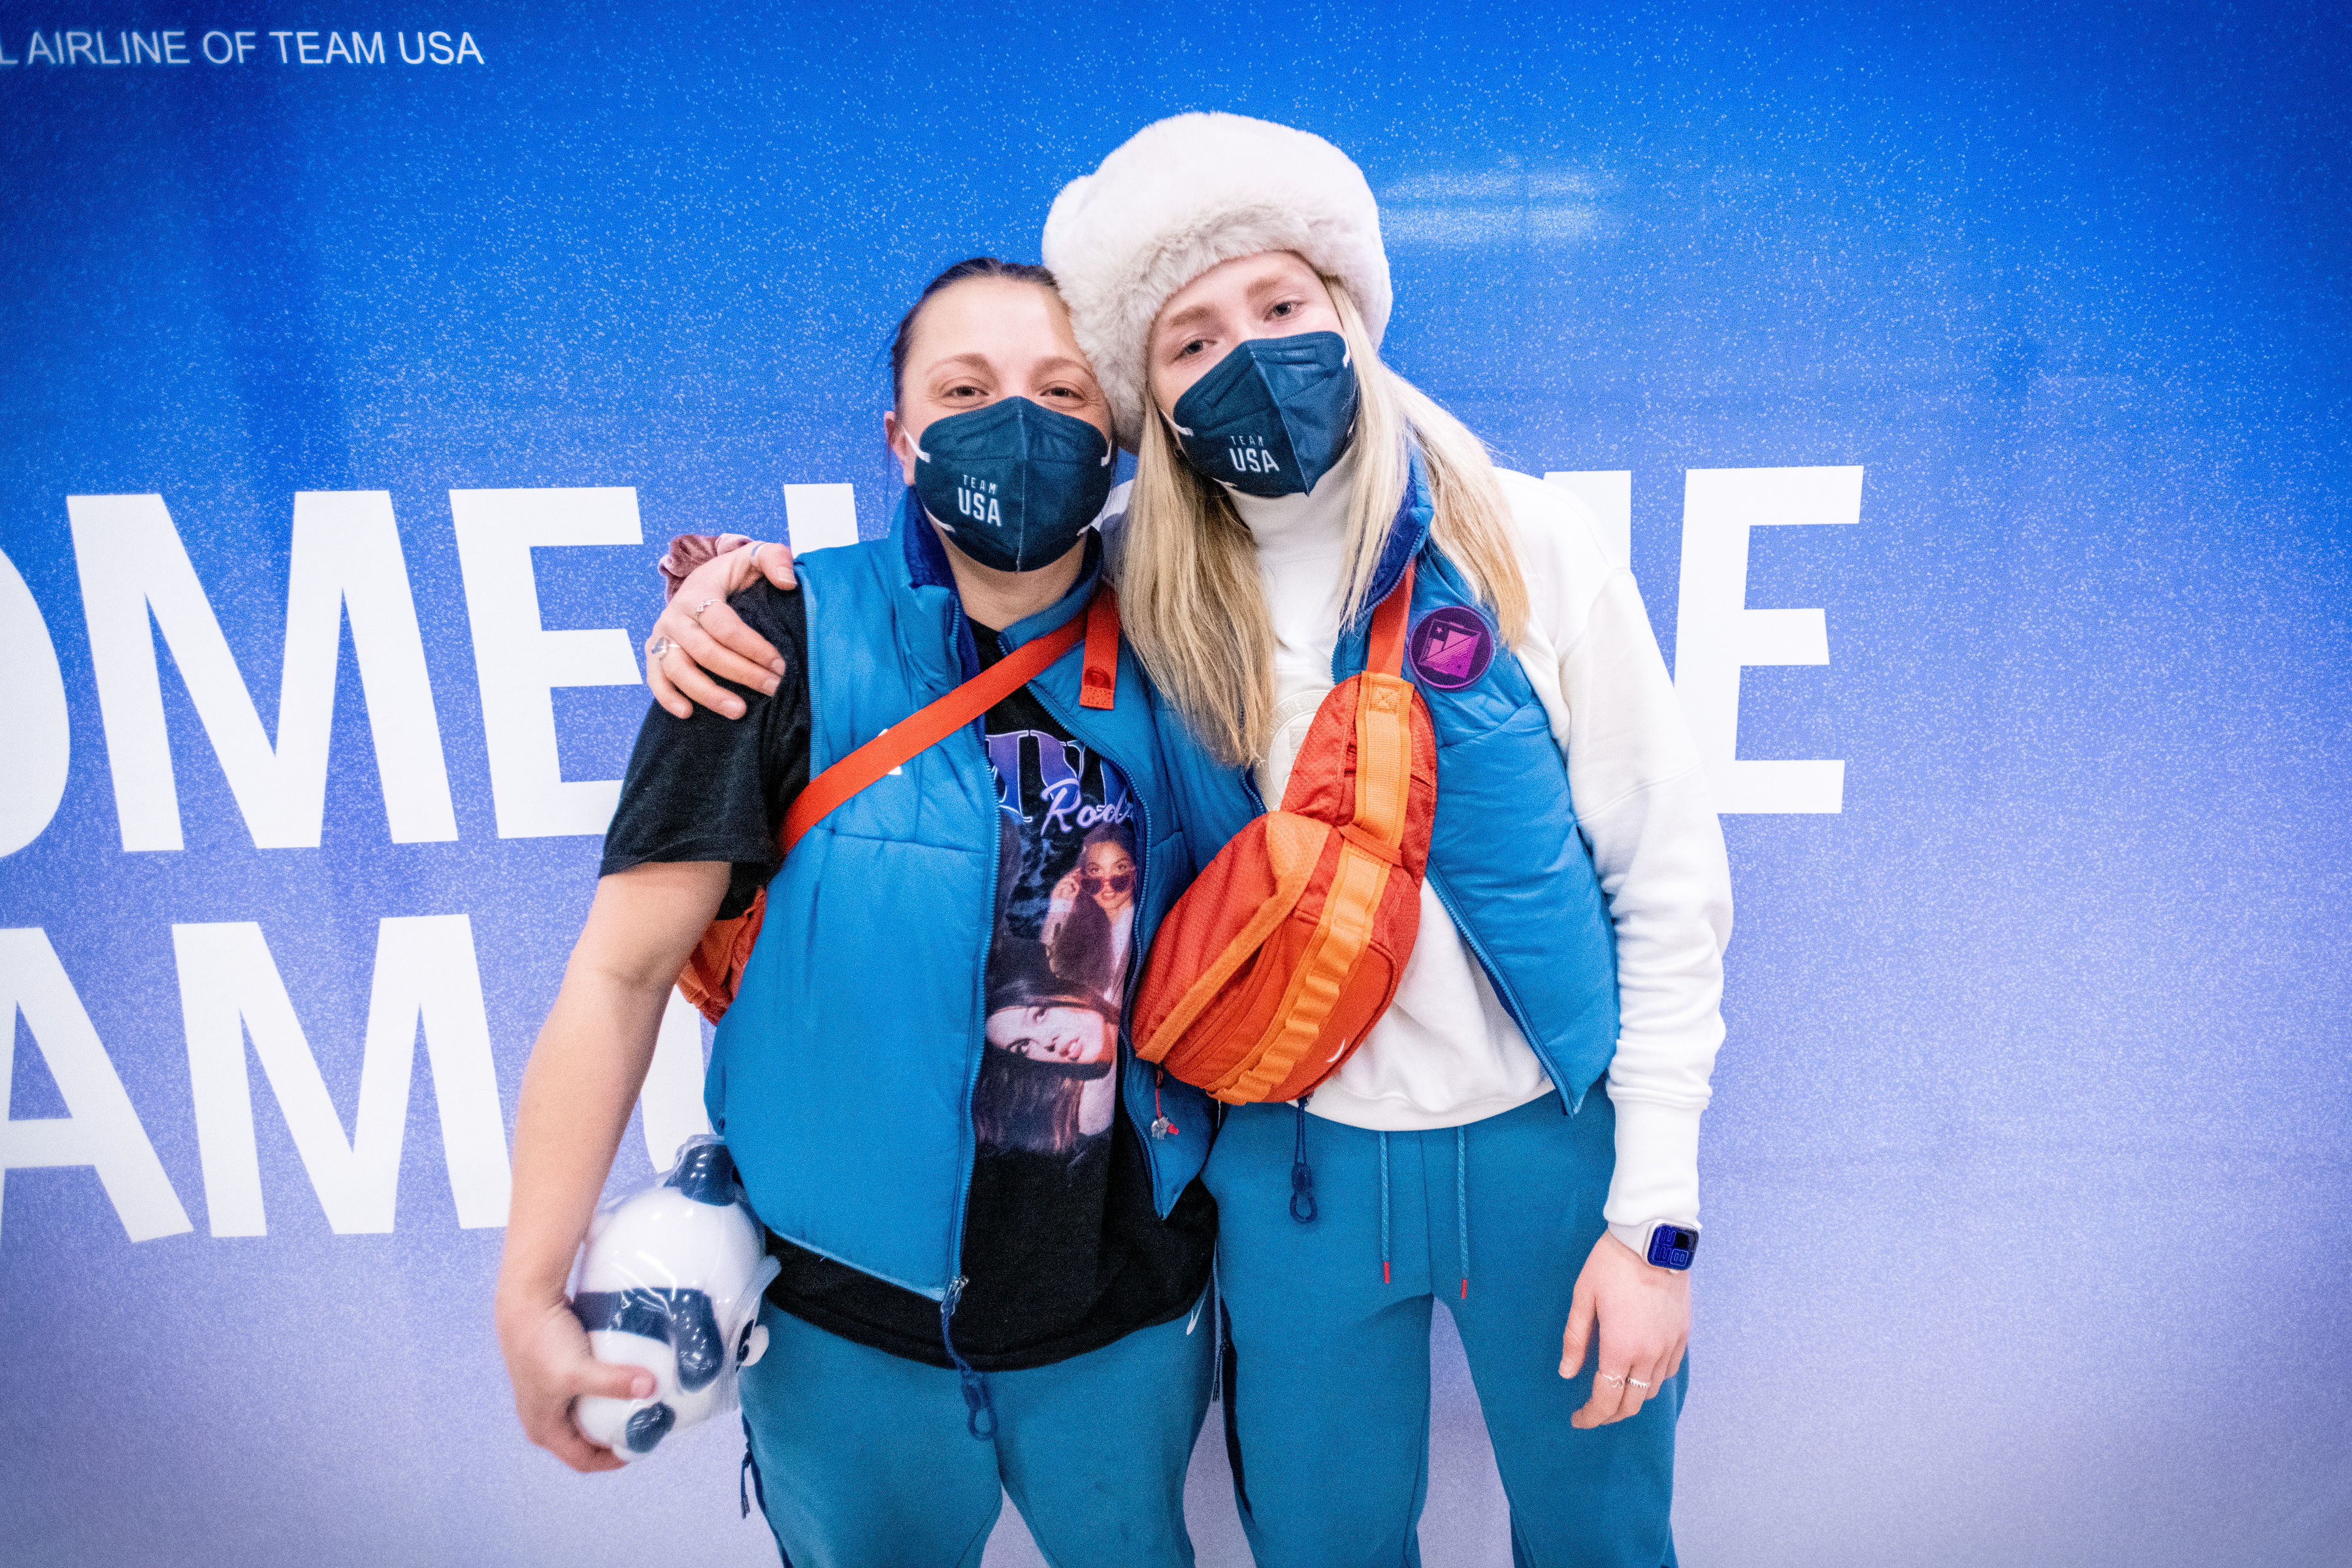 Freestyle skiers Darian Stevens and Maggie Voisin pose for a portrait as Team USA athletes arrive at Salt Lake City International Airport in Salt Lake City, Utah on Monday, Feb. 21, 2022.